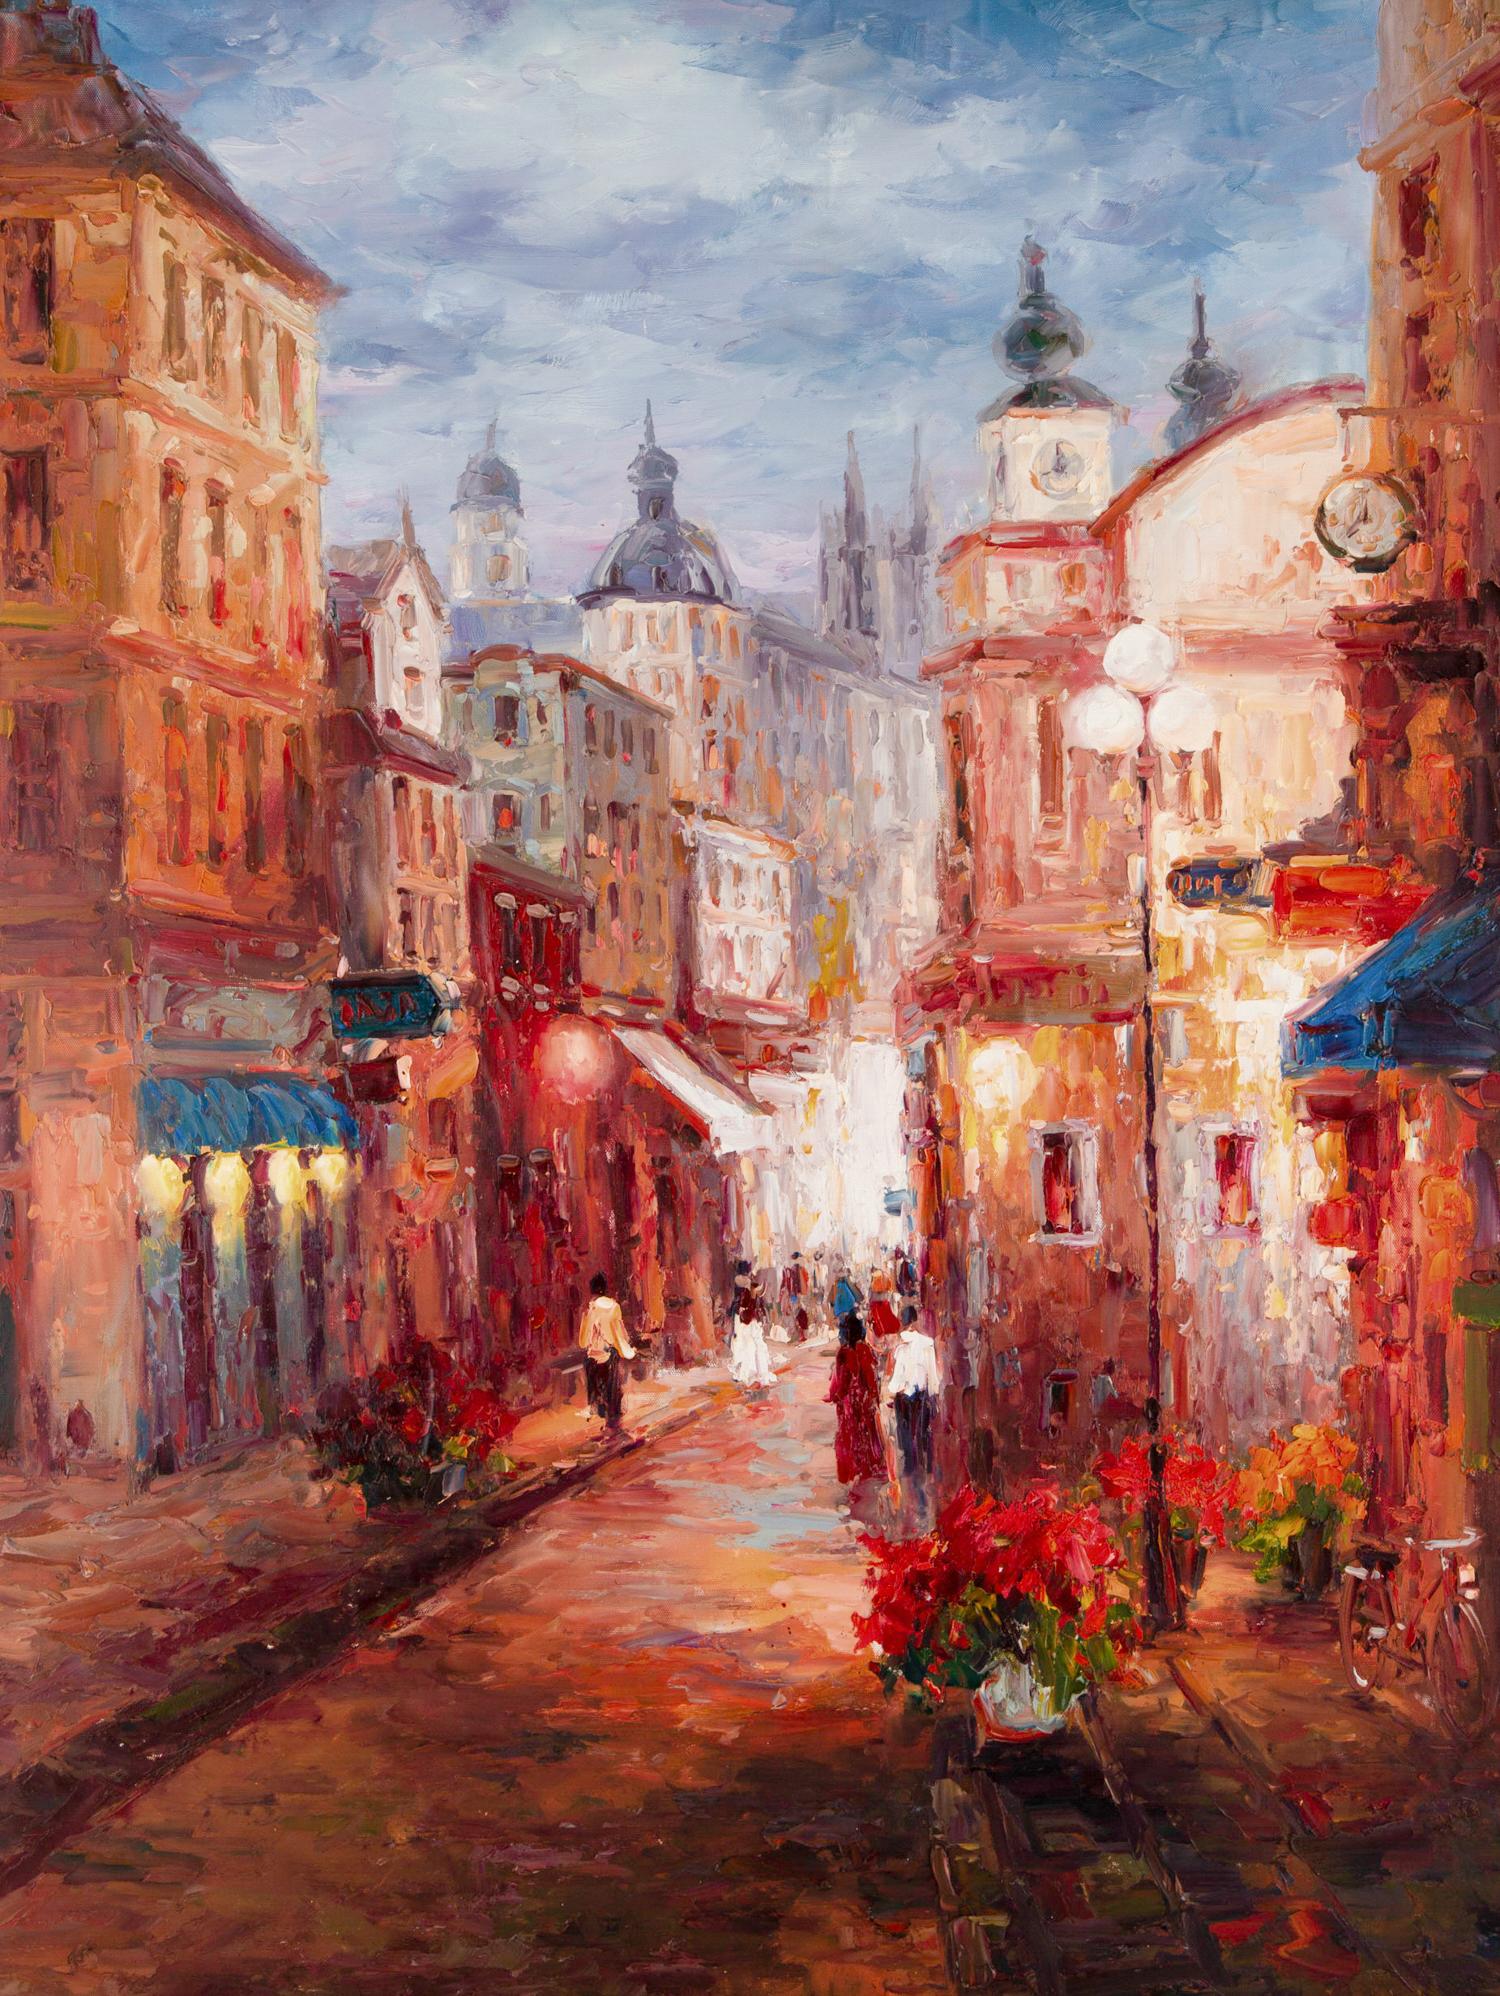 Title: Night 4
Medium: Oil on canvas
Size: 40 x 30 inches
Frame: Framing options available!
Condition: The painting appears to be in excellent condition.

Year: 2000 Circa
Artist: Lin Hongdan
Signature: Unsigned
Signature Location: N/A
Provenance: